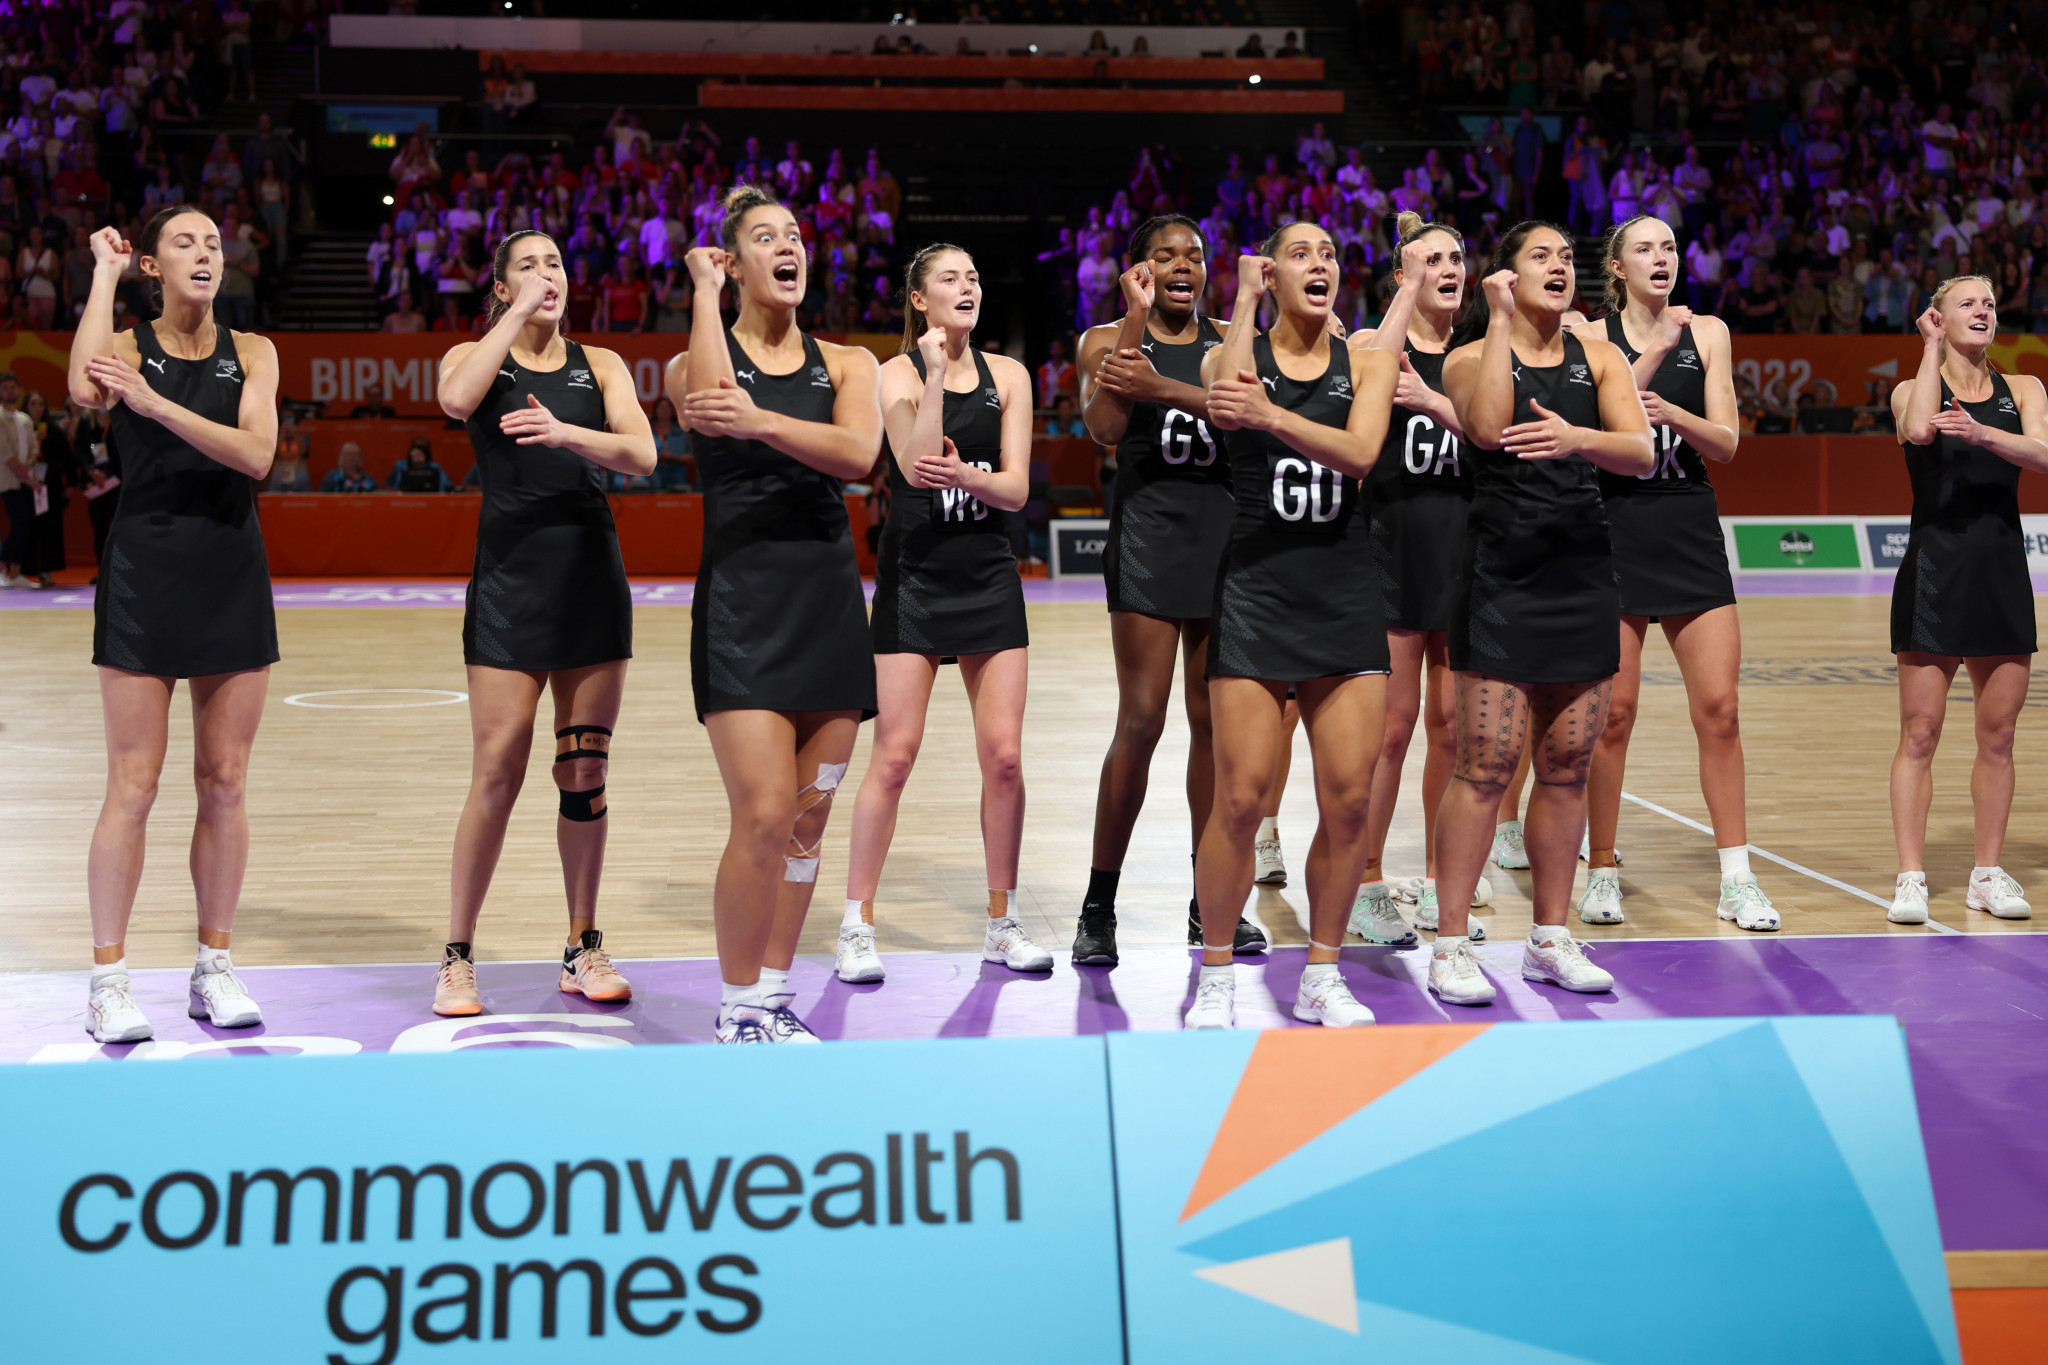 New Zealand announce they are interested in hosting 2034 Commonwealth Games